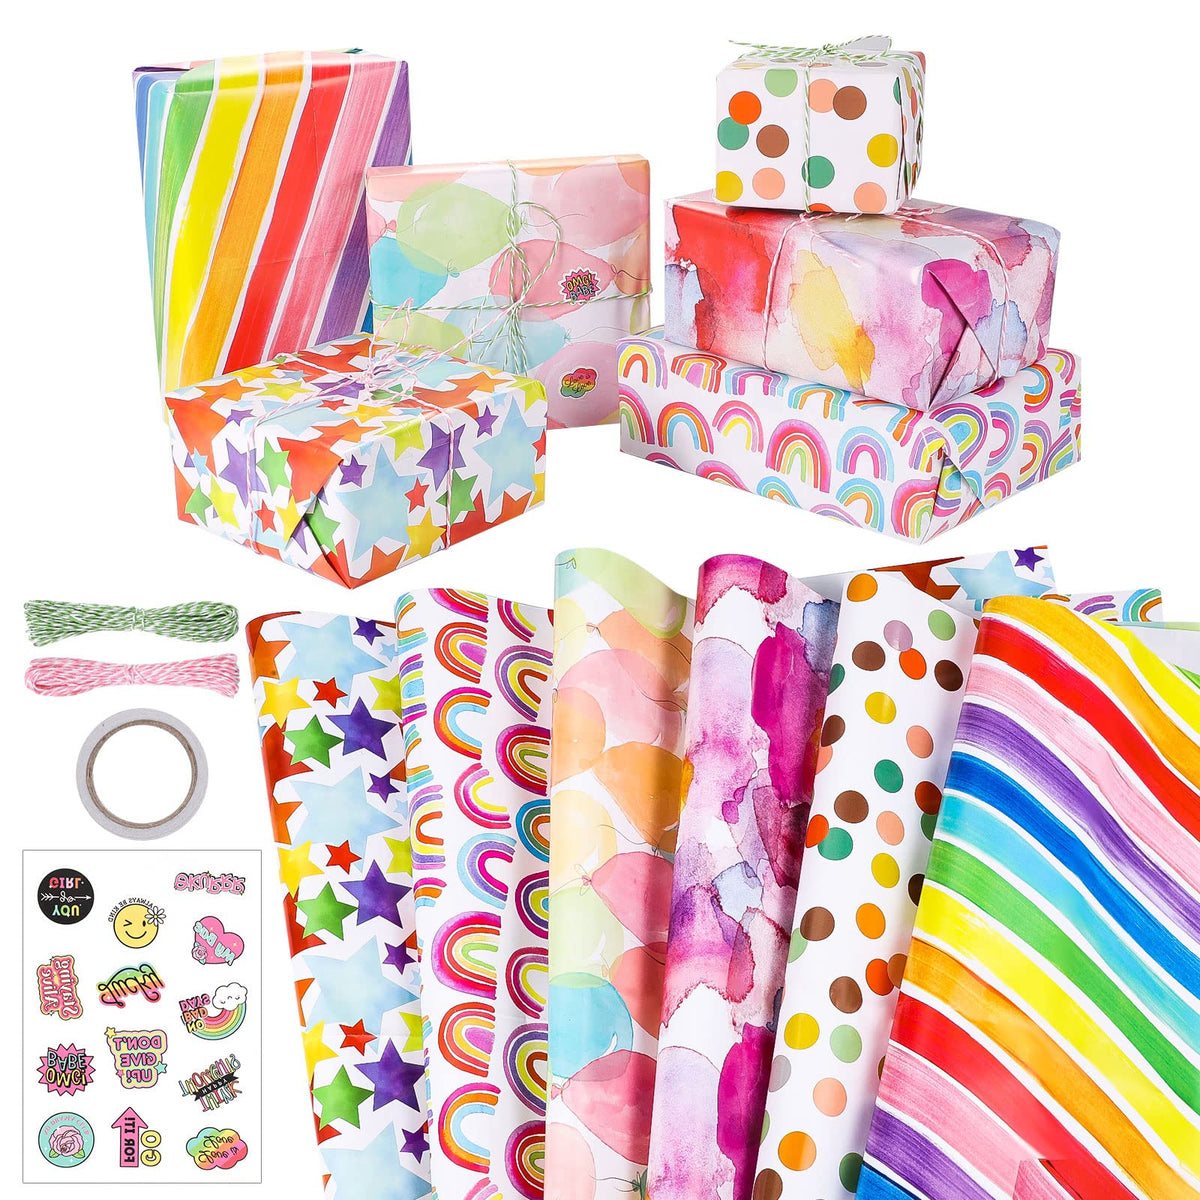 6 x Rainbow Wrapping Paper, 50 x 70cm Happy Birthday Wrapping Paper with Sticker and Rope Gift Wrap Set for Festival, Party or Wedding Gift Wrapping